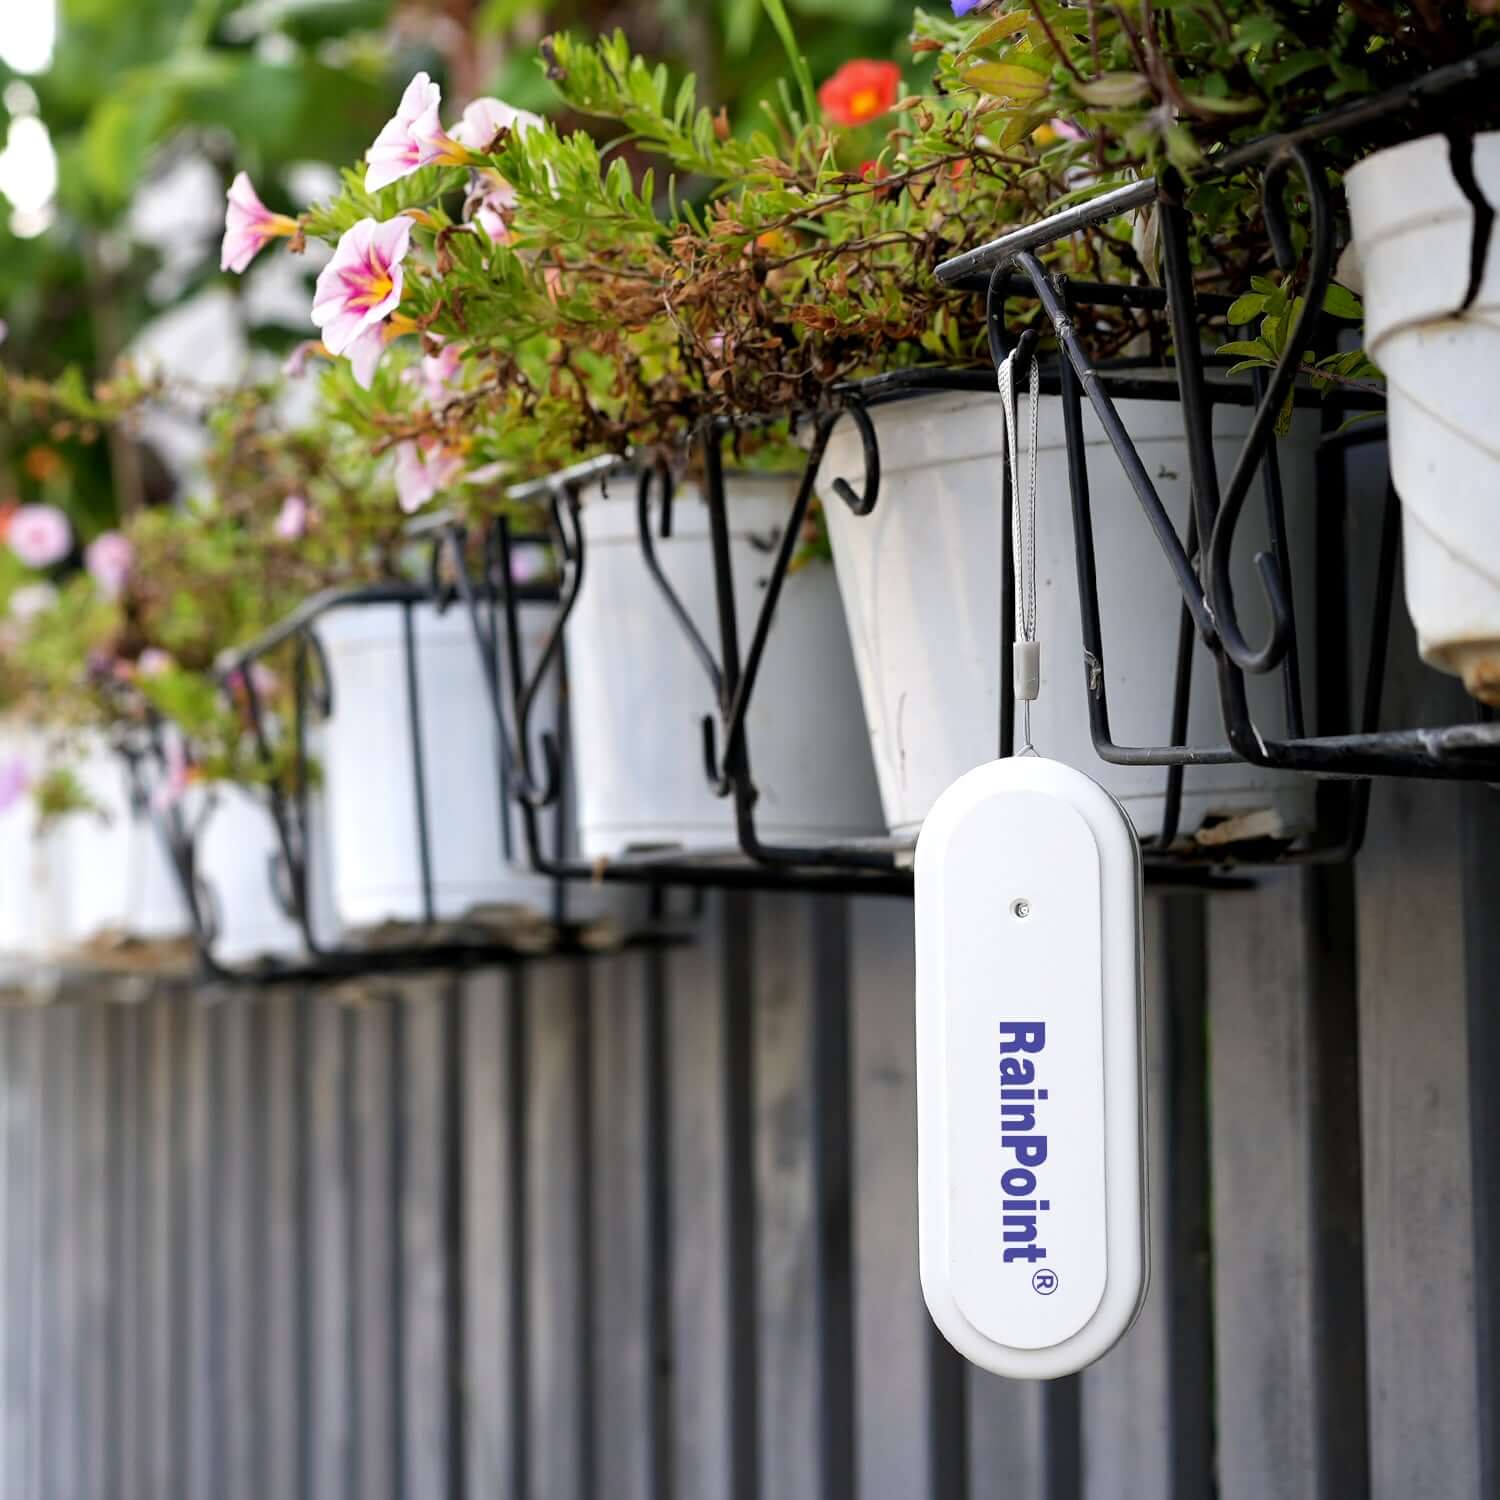 The RainPoint‘s Outdoor Air Humidity Sensor is an ideal solution for accurate temperature and humidity readings in your area. 